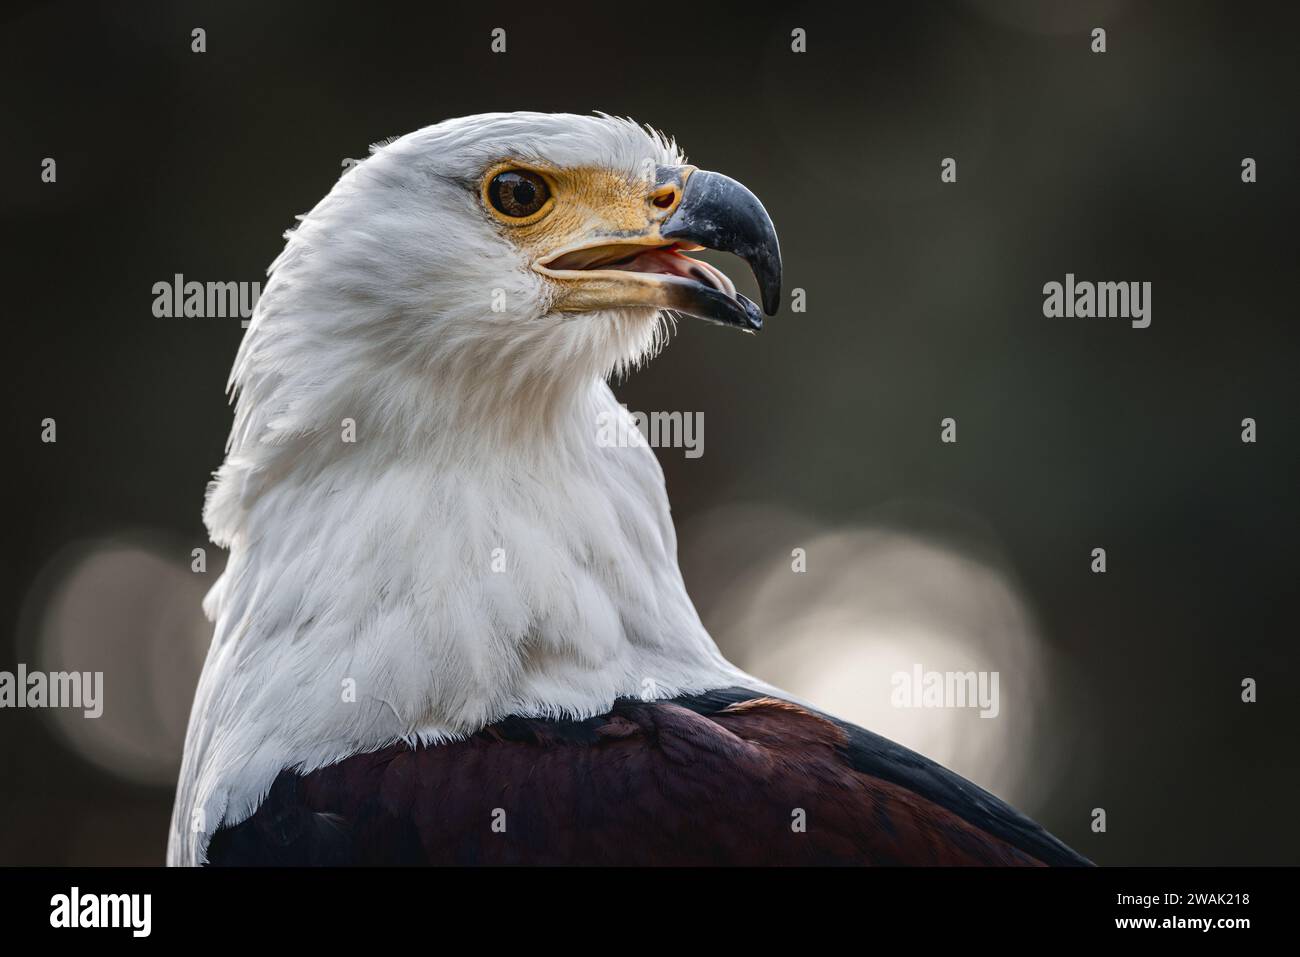 A majestic eagle stands perched atop a rocky outcrop, surveying its surroundings with an intense gaze Stock Photo